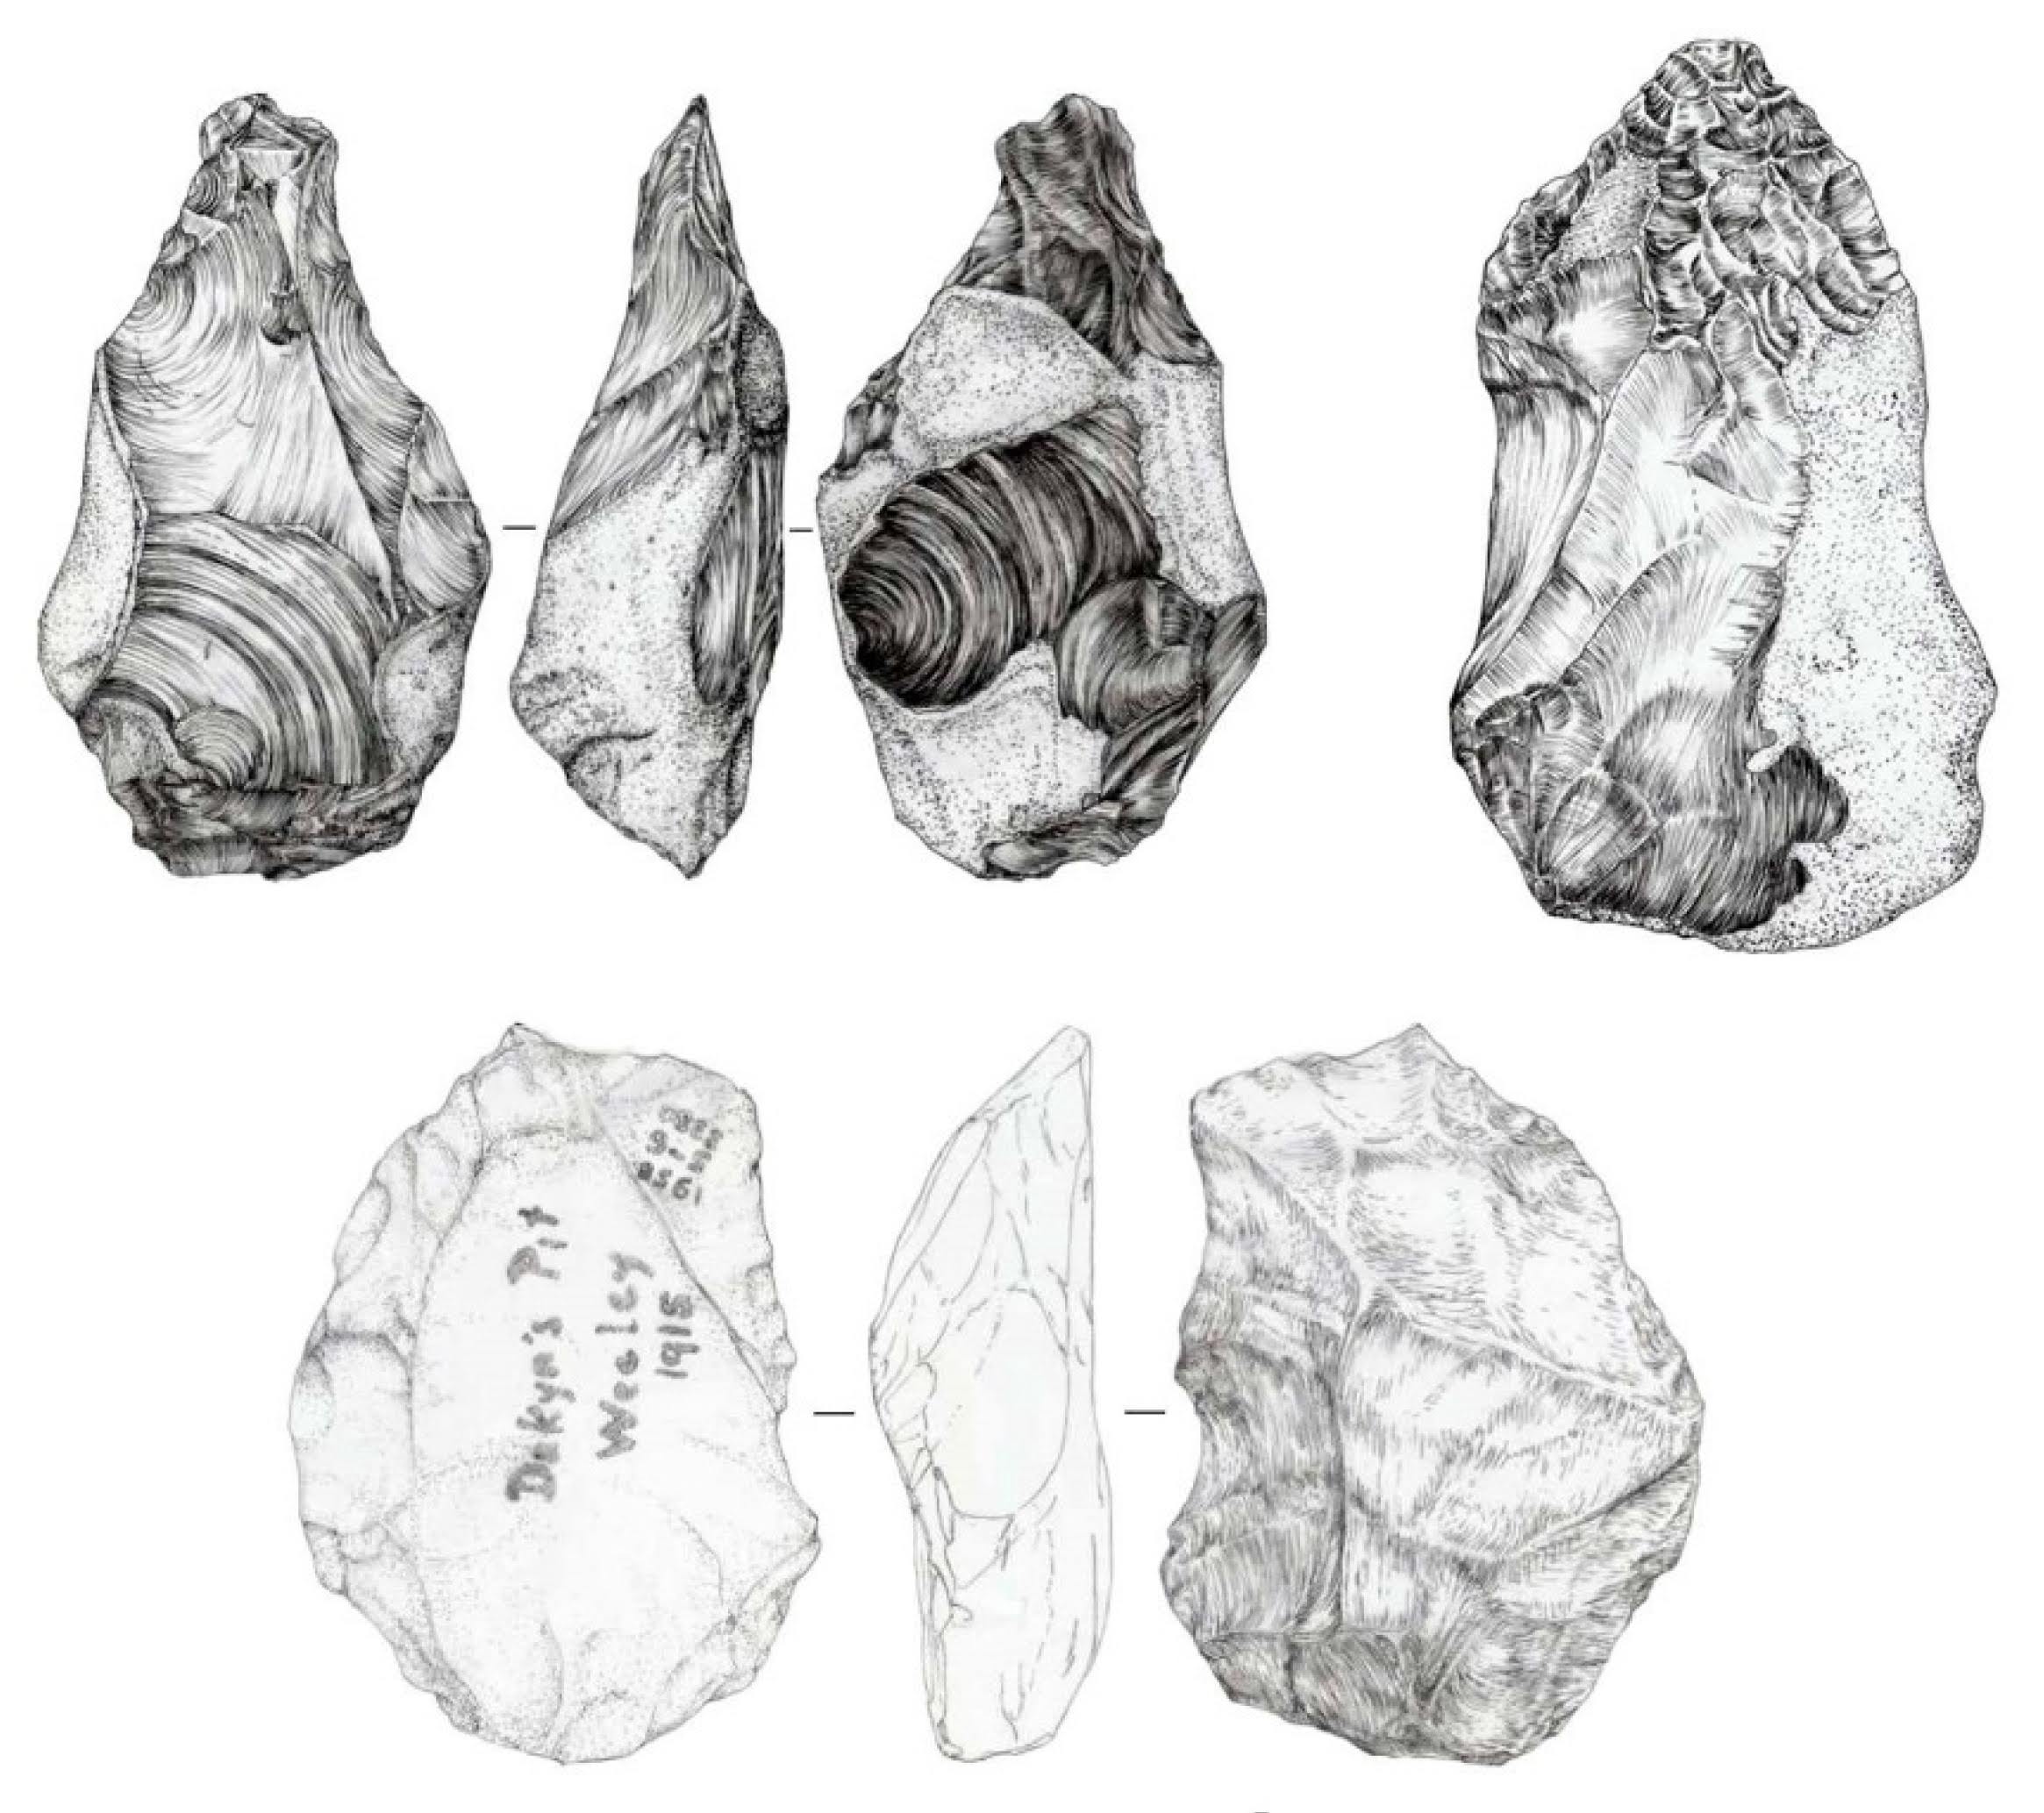 Three hand axes from varying views, taken from Allen et al. (2022)